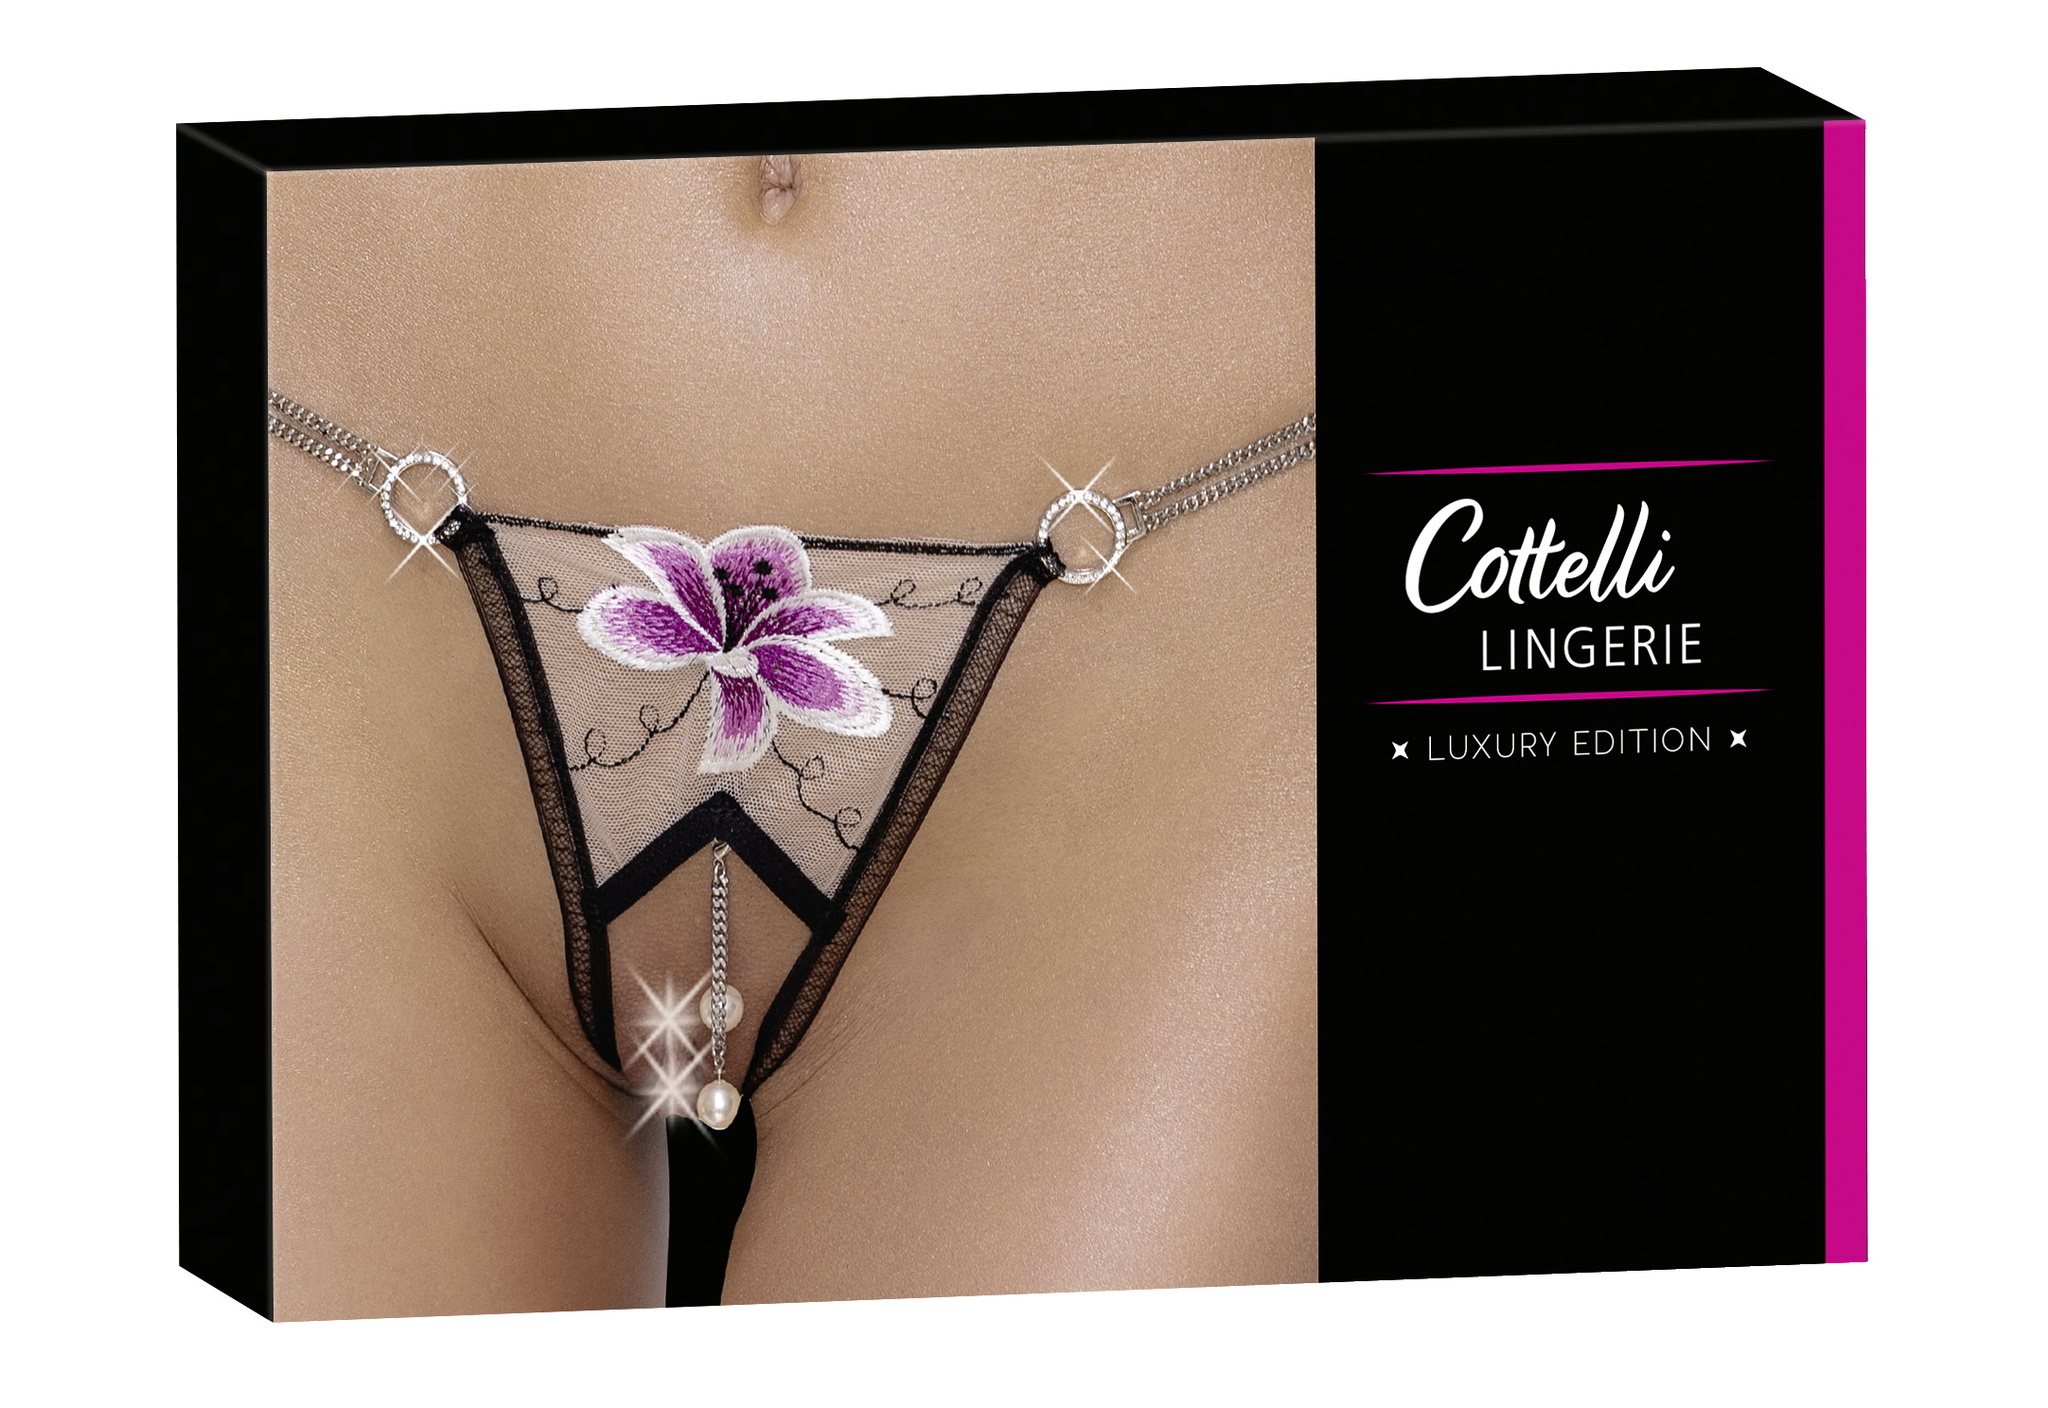 Crotchless String m Blomma S/M